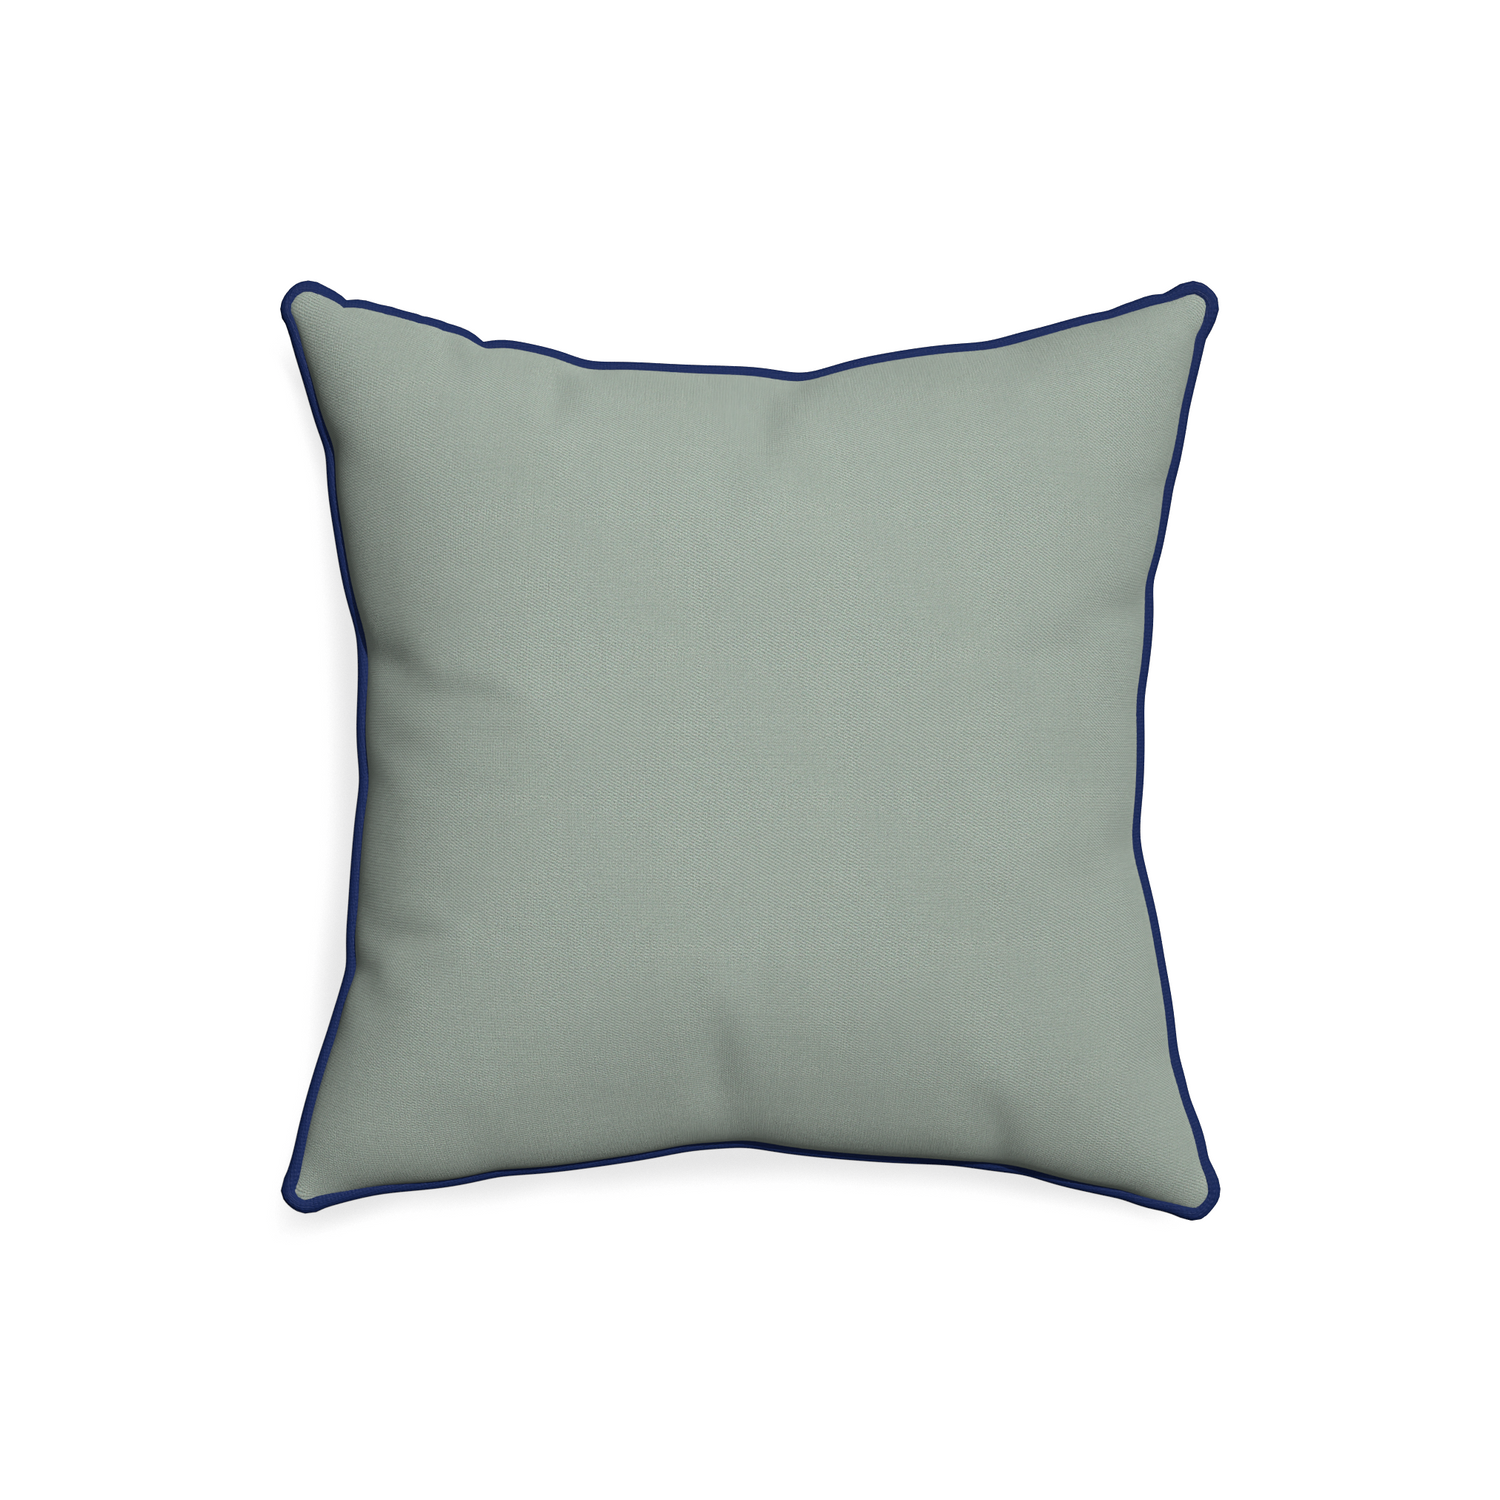 20-square sage custom sage green cottonpillow with midnight piping on white background